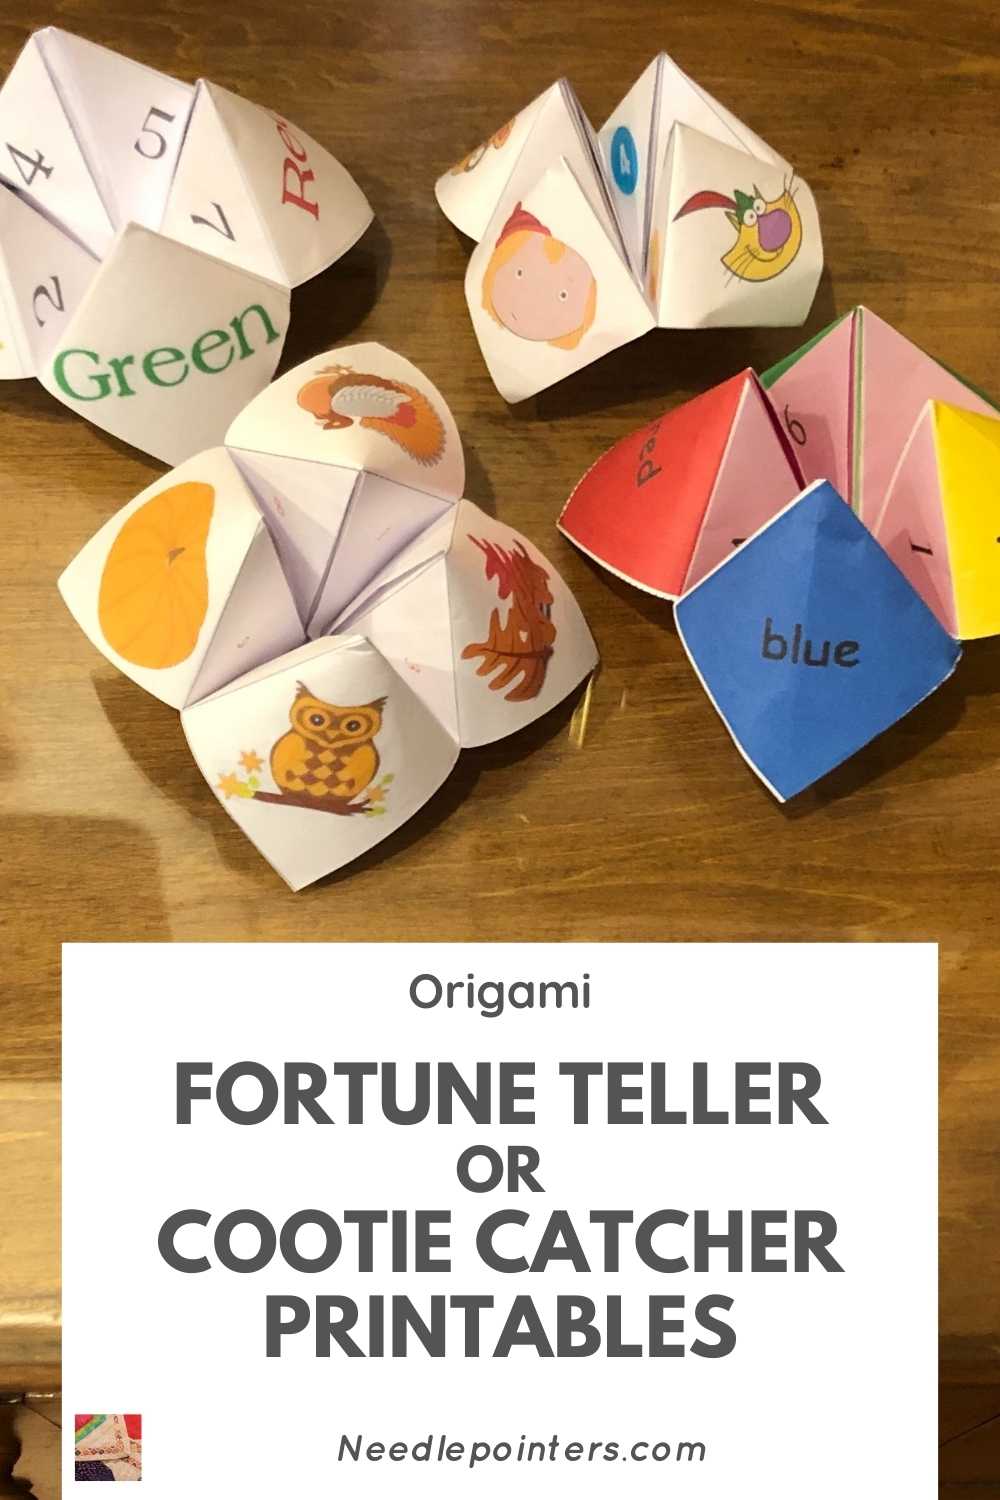 Origami Fortune Tellers and Cootie Catchers